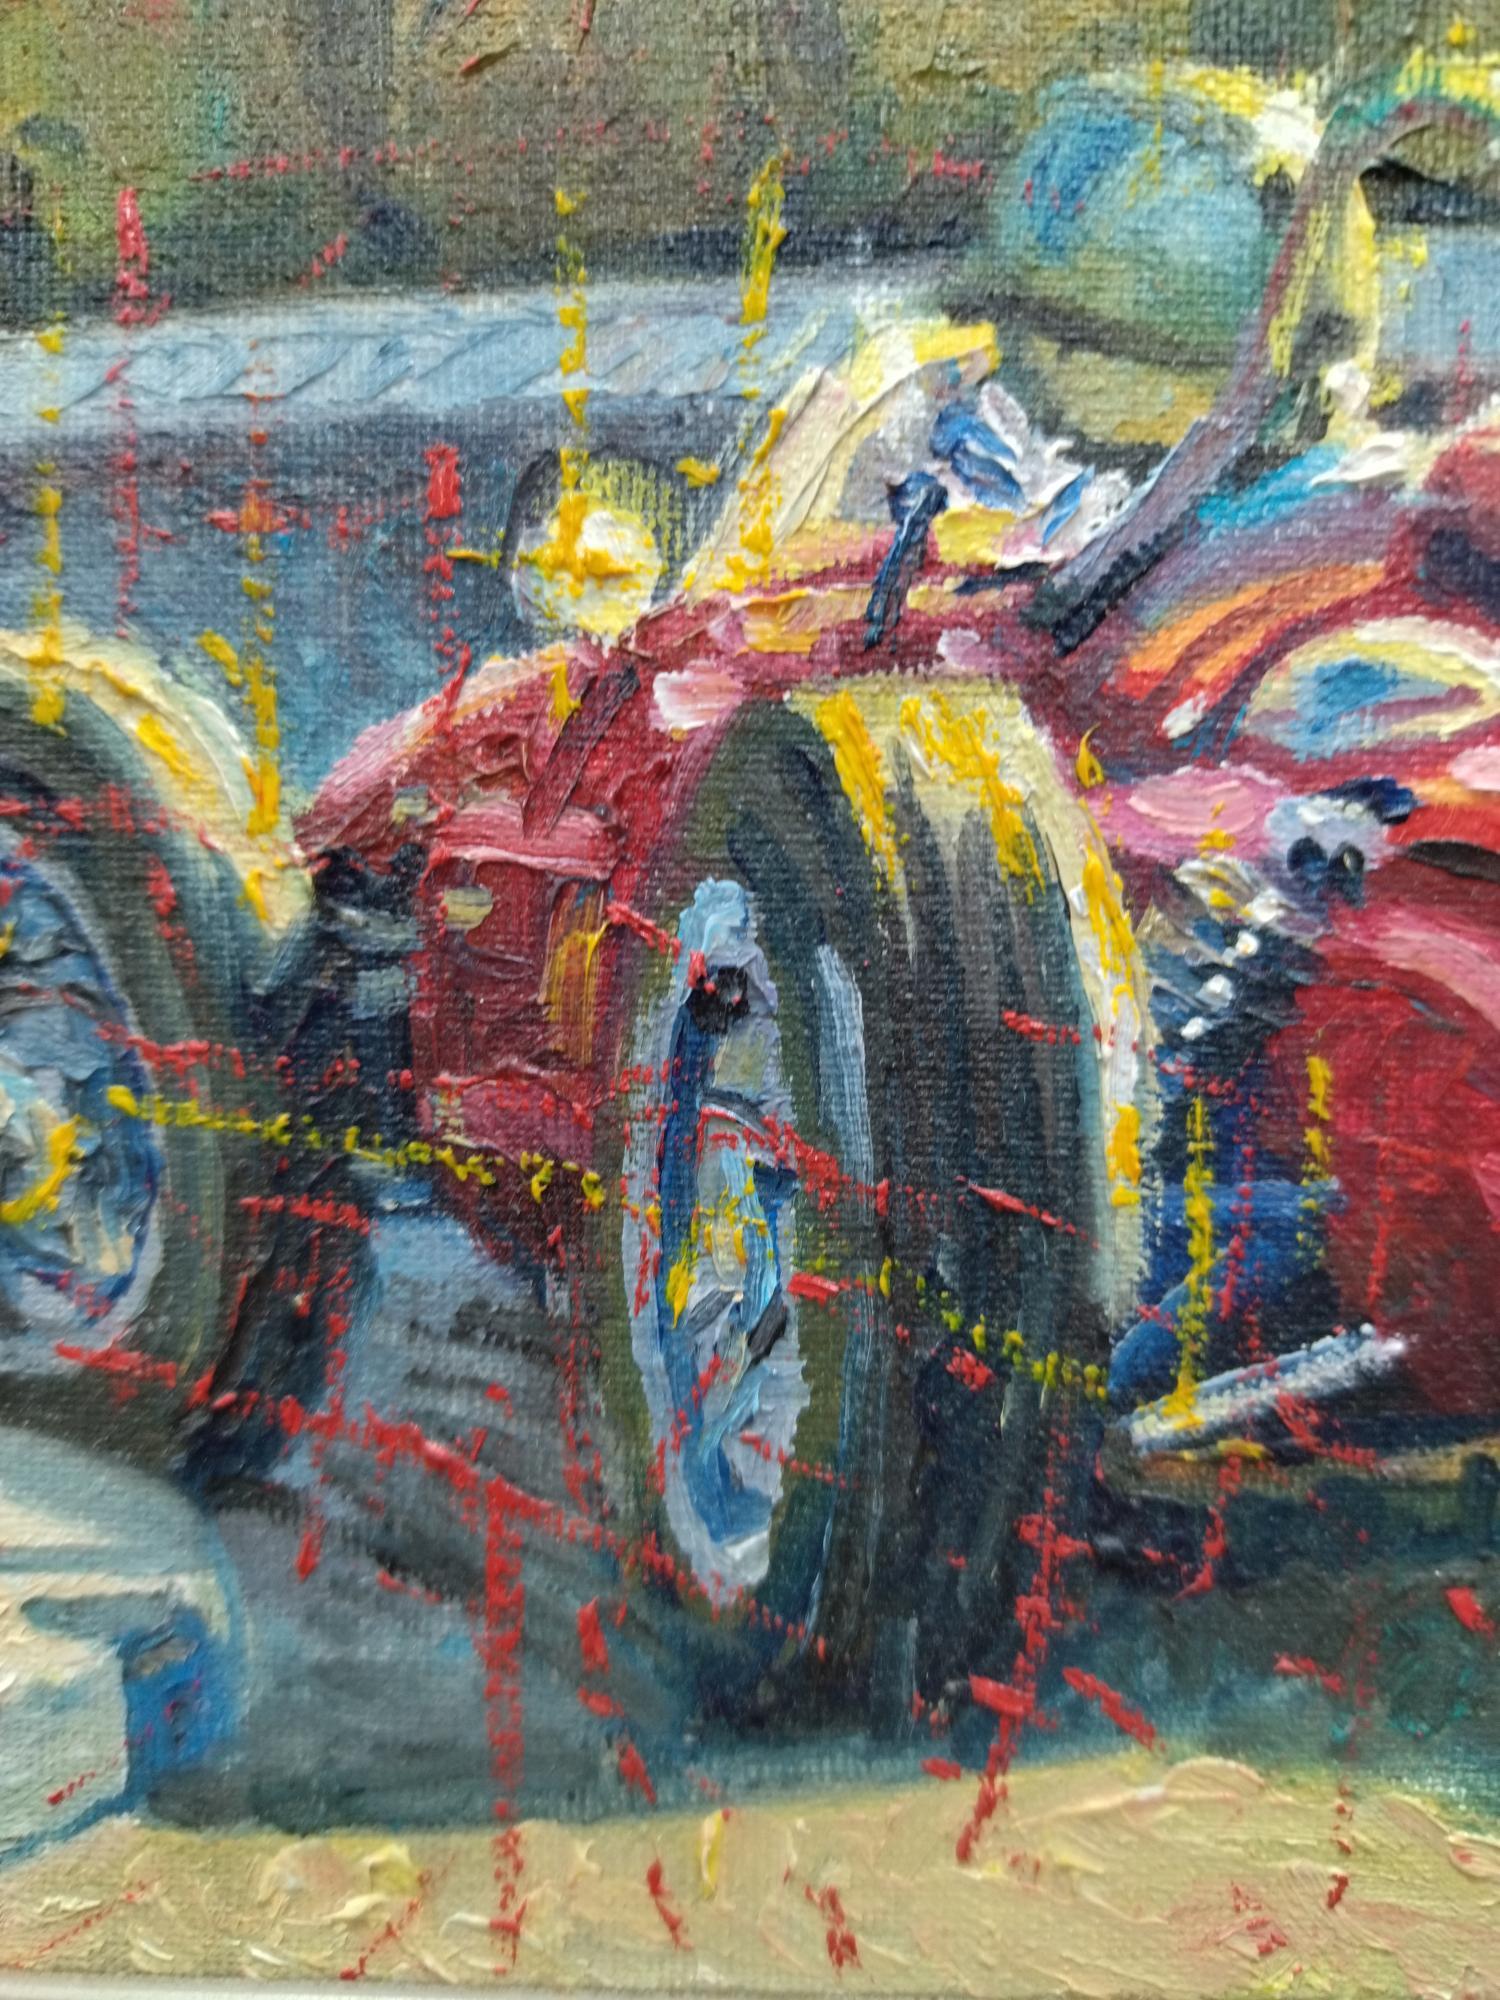 original acrylic painting
BALAGUER , Alex ( Barcelona 1968 )
During early childhood, Àlex Balaguer began to sketch motorcars symbolic of Maranello’s trademark vehicle.
Self-taught in the art world, Balaguer decided to unite his big love of motoring